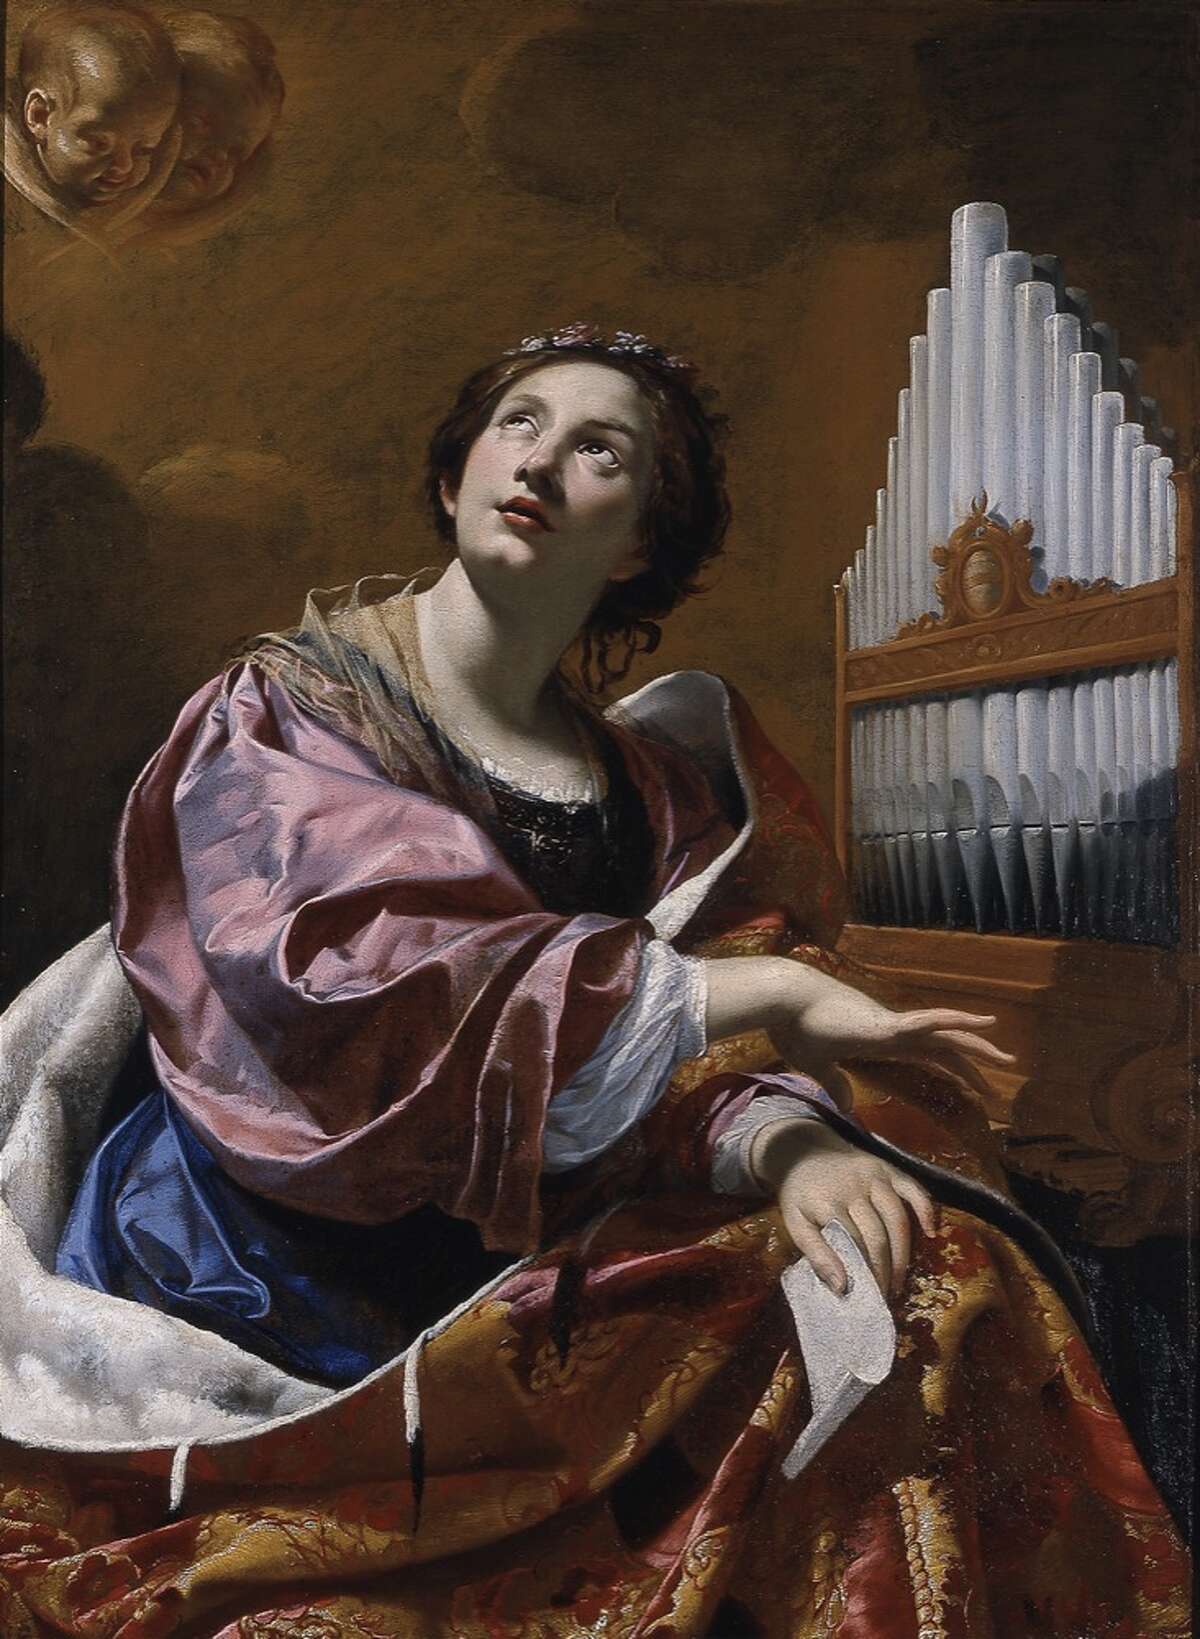 For MOT: From the Blanton Museum of Art: Simon Vouet Saint Cecilia, c. 1626 Oil on canvas 52 13/16 x 38 11/16 in. The Suida-Manning Collection, 1999